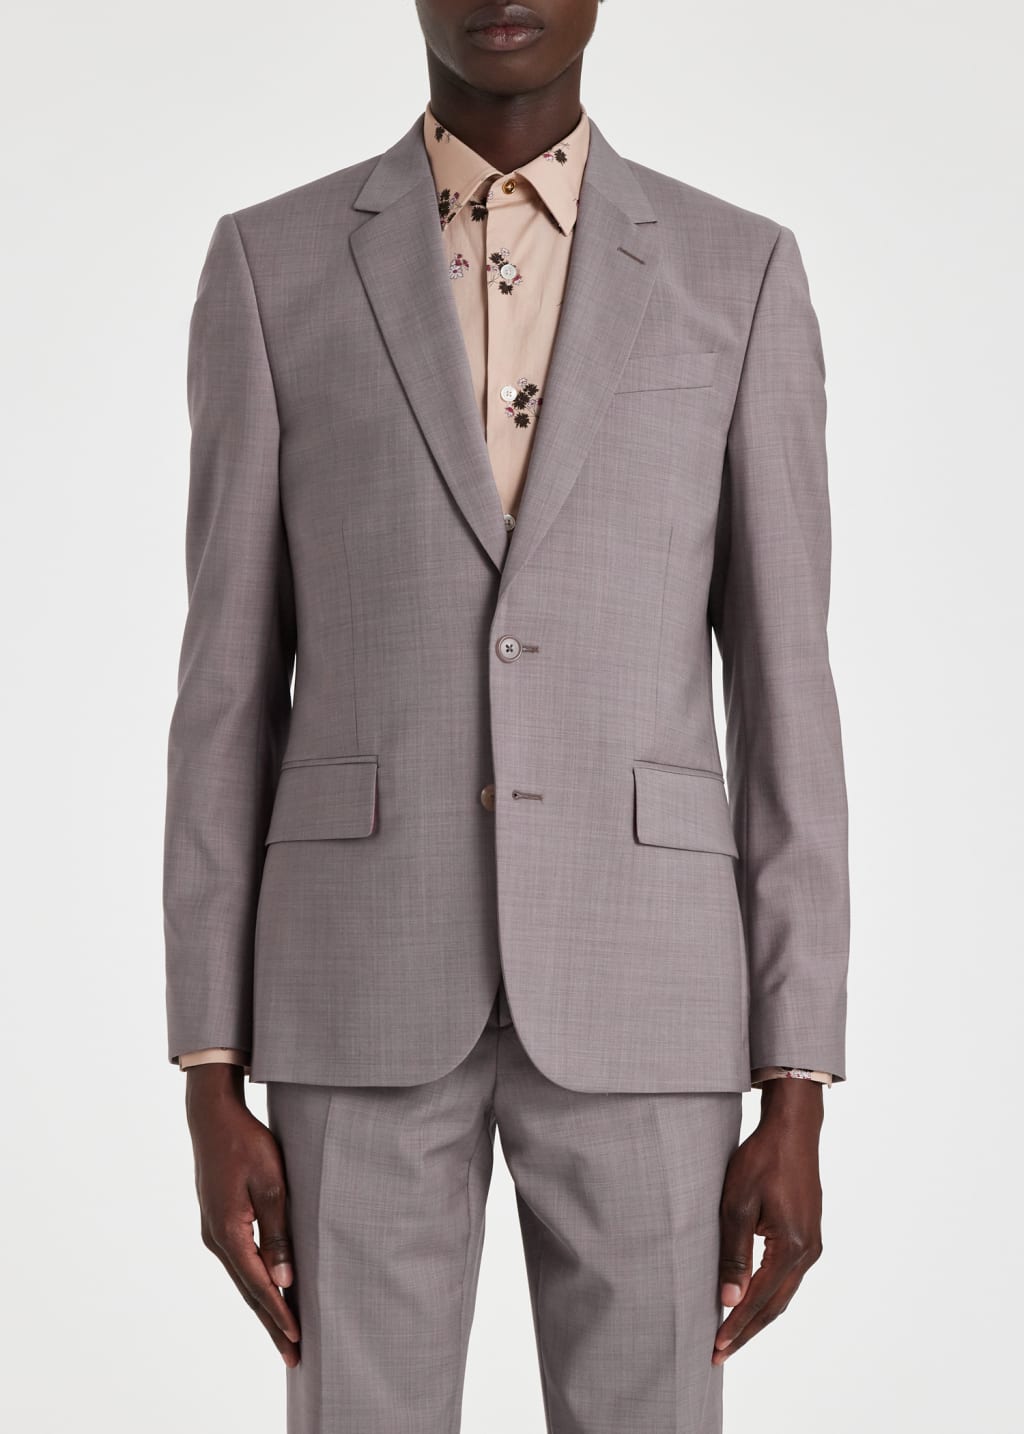 Model View - The Soho - Tailored-Fit Lavender Wool Suit Paul Smith